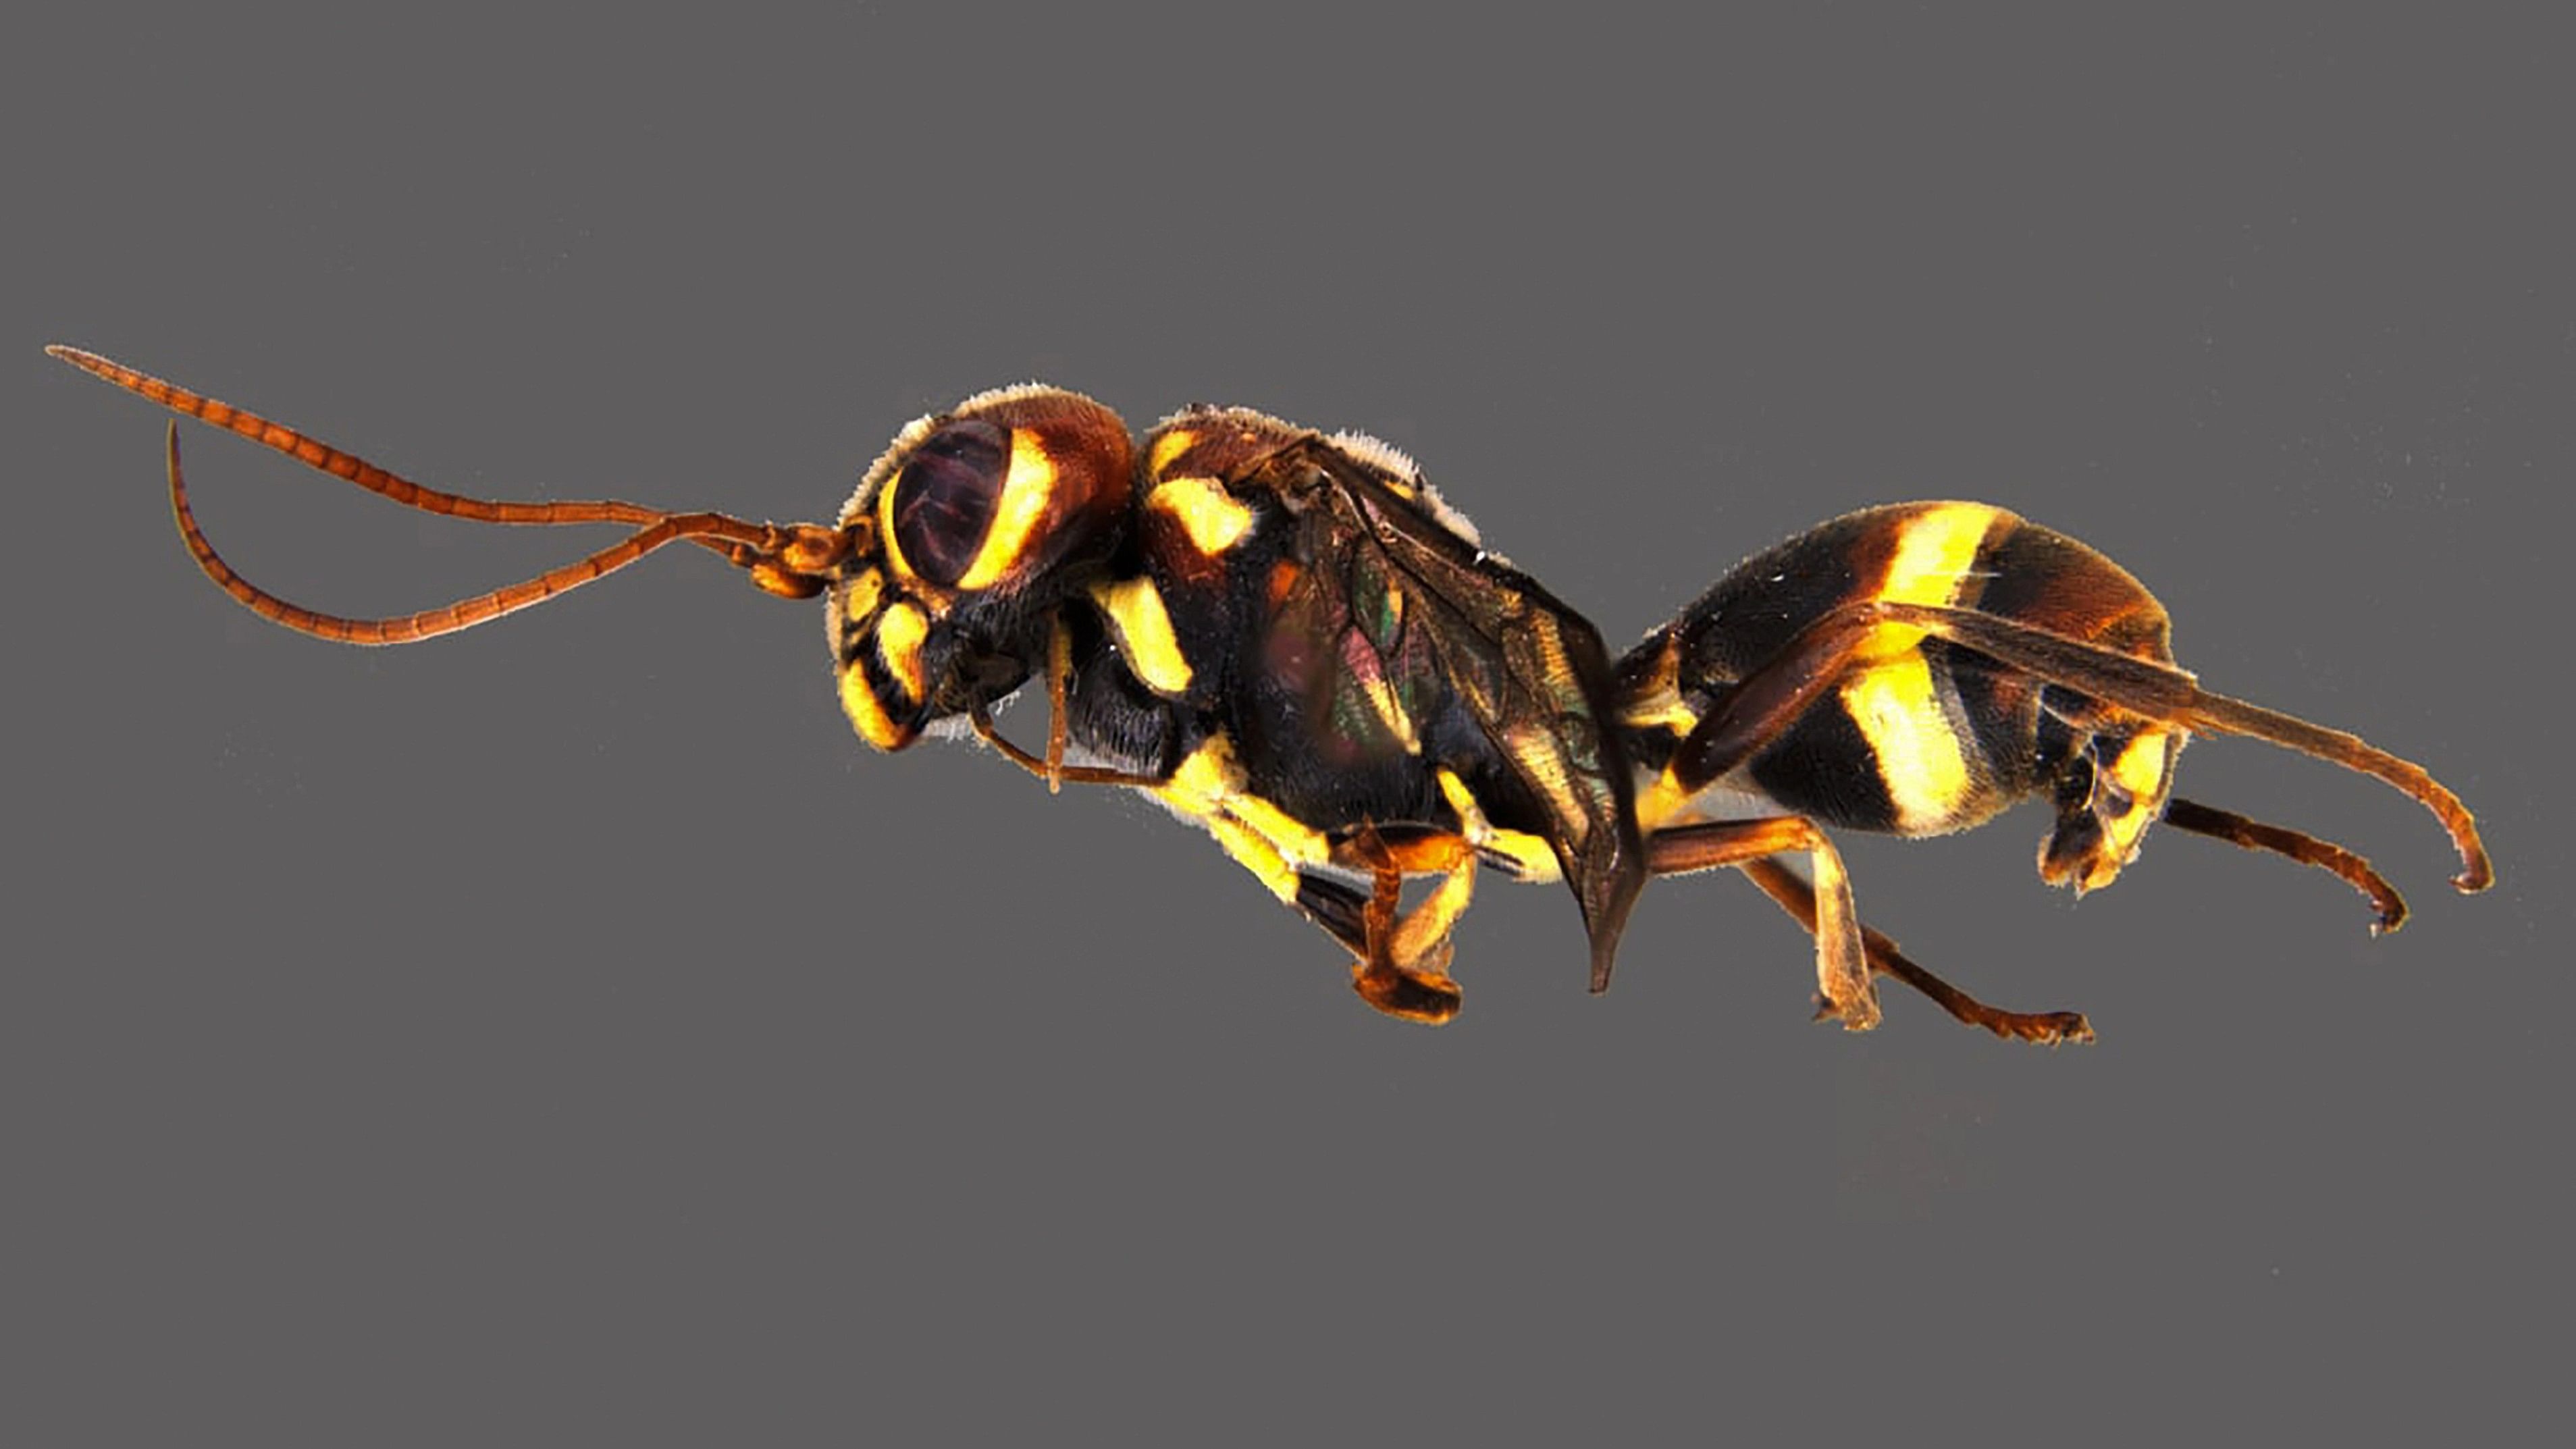 <div class="paragraphs"><p> Scientists of the Zoological Survey of India have discovered a new species of wasp, a winged insect, in the Western Ghat hills part of Kerala. The new species is Taeniogonalos dhritiae, named after ZSI Director Dhriti Banerjee. </p></div>